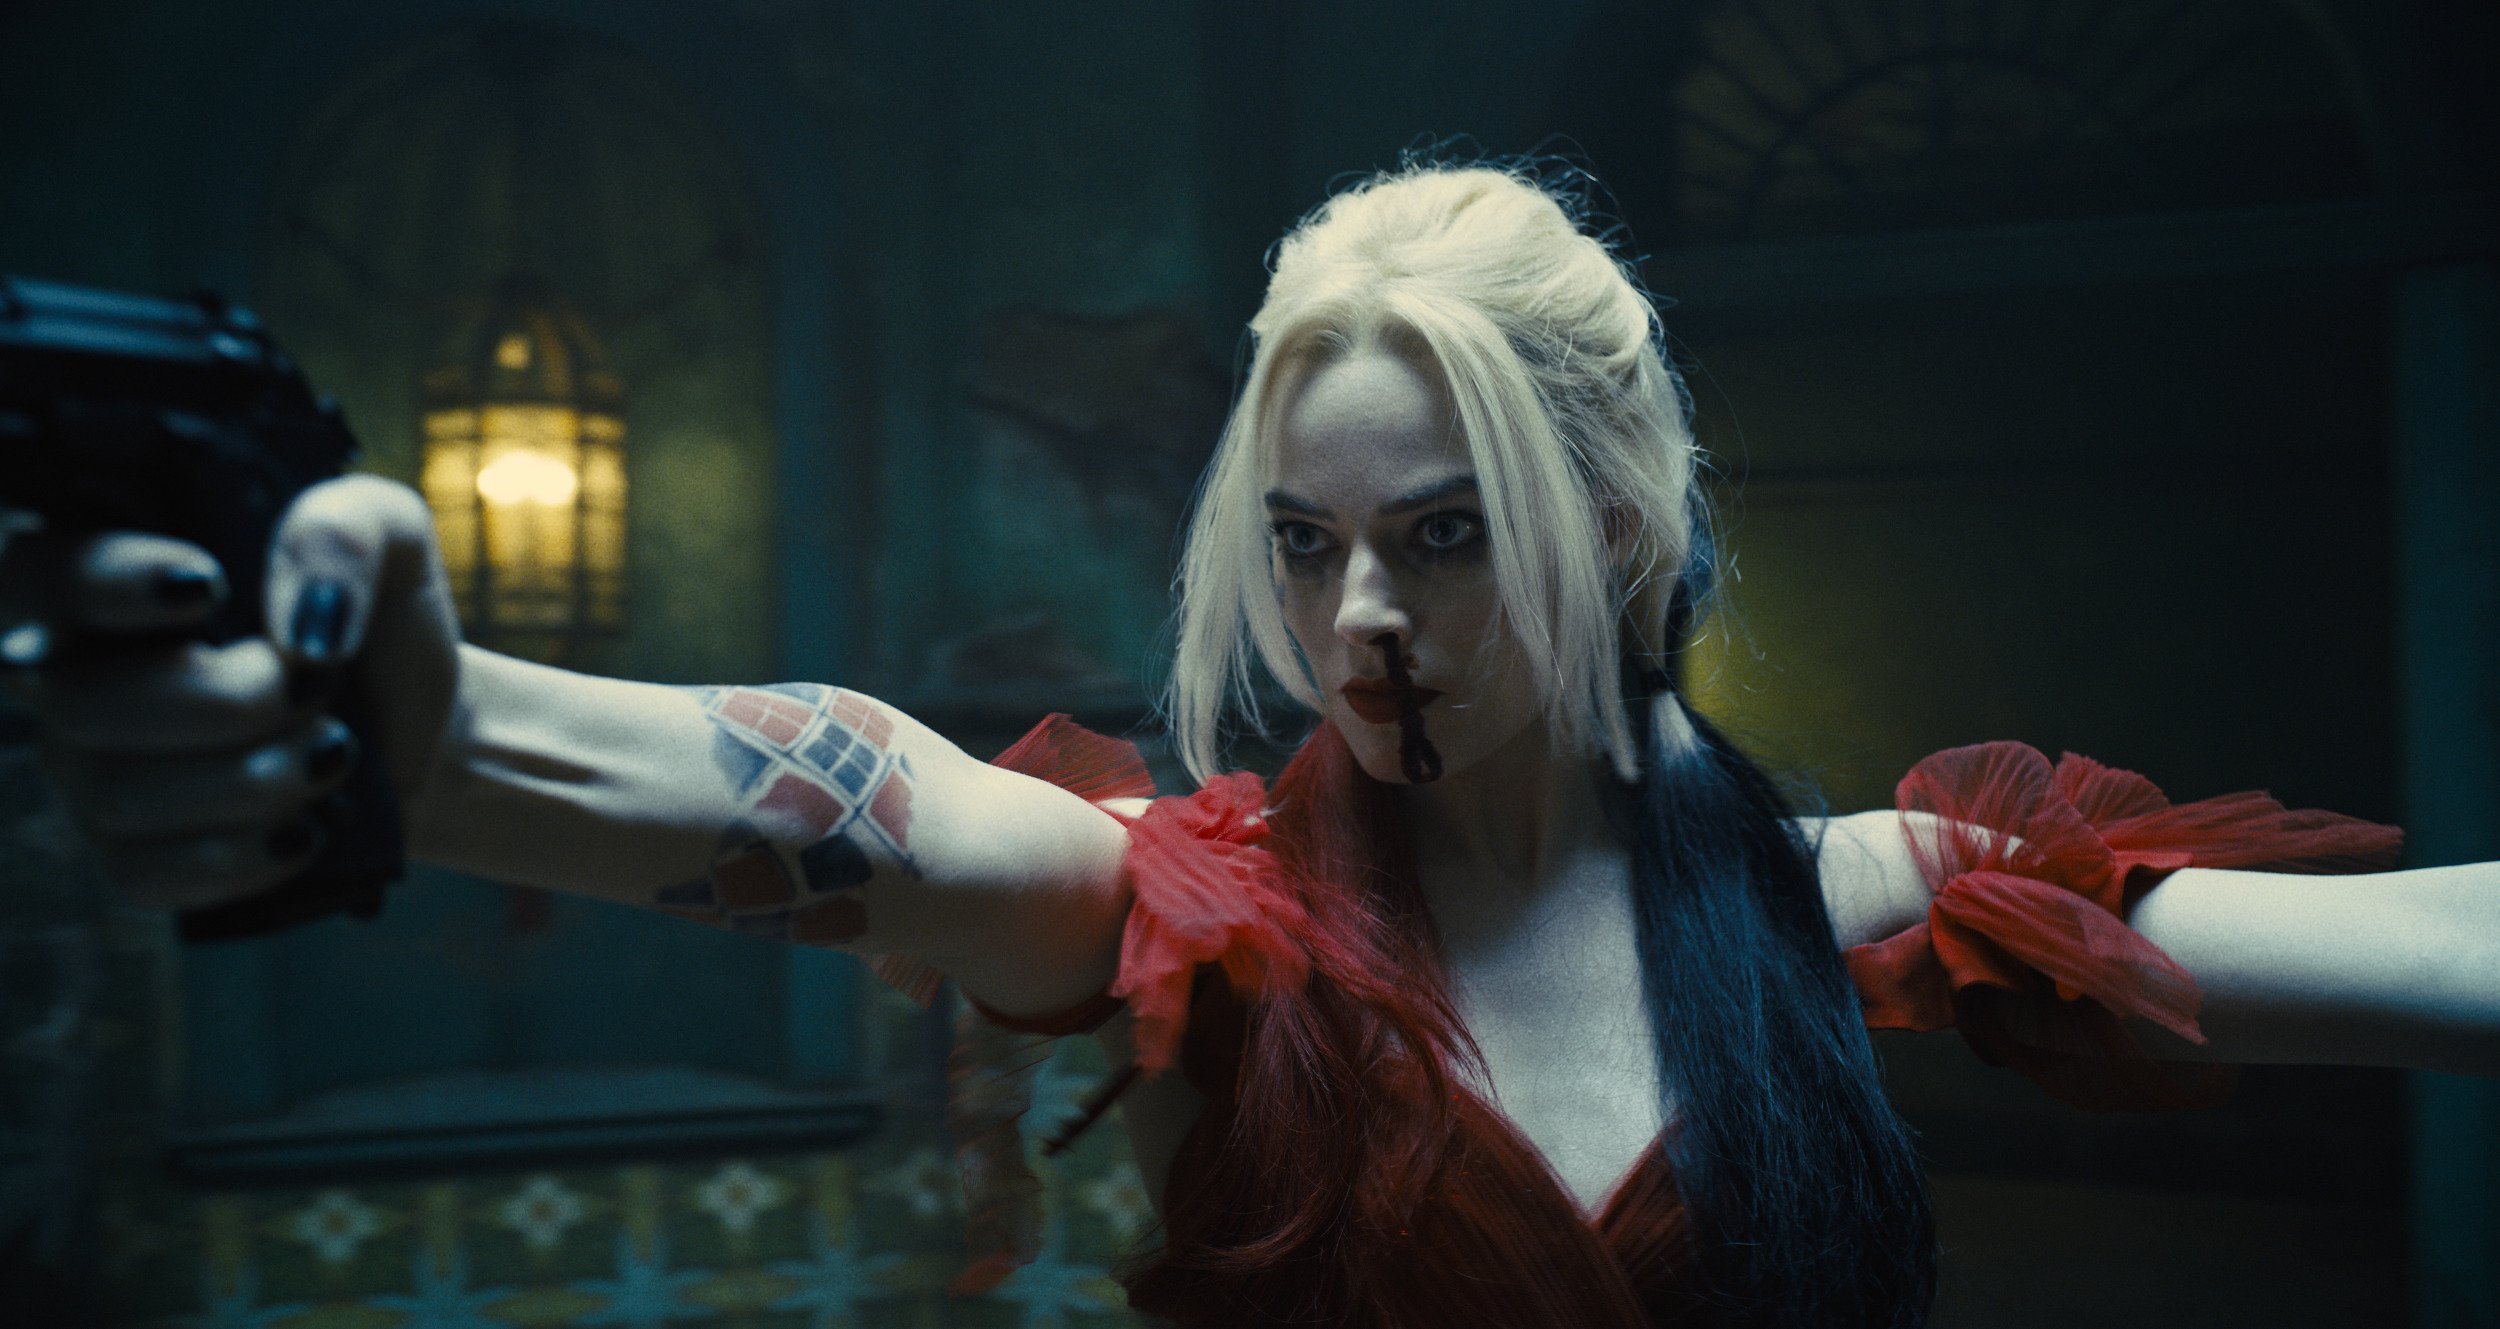 Margot Robbie as Harley Quinn in 'The Suicide Squad'. Her nose is bleeding and she's holding up two guns.